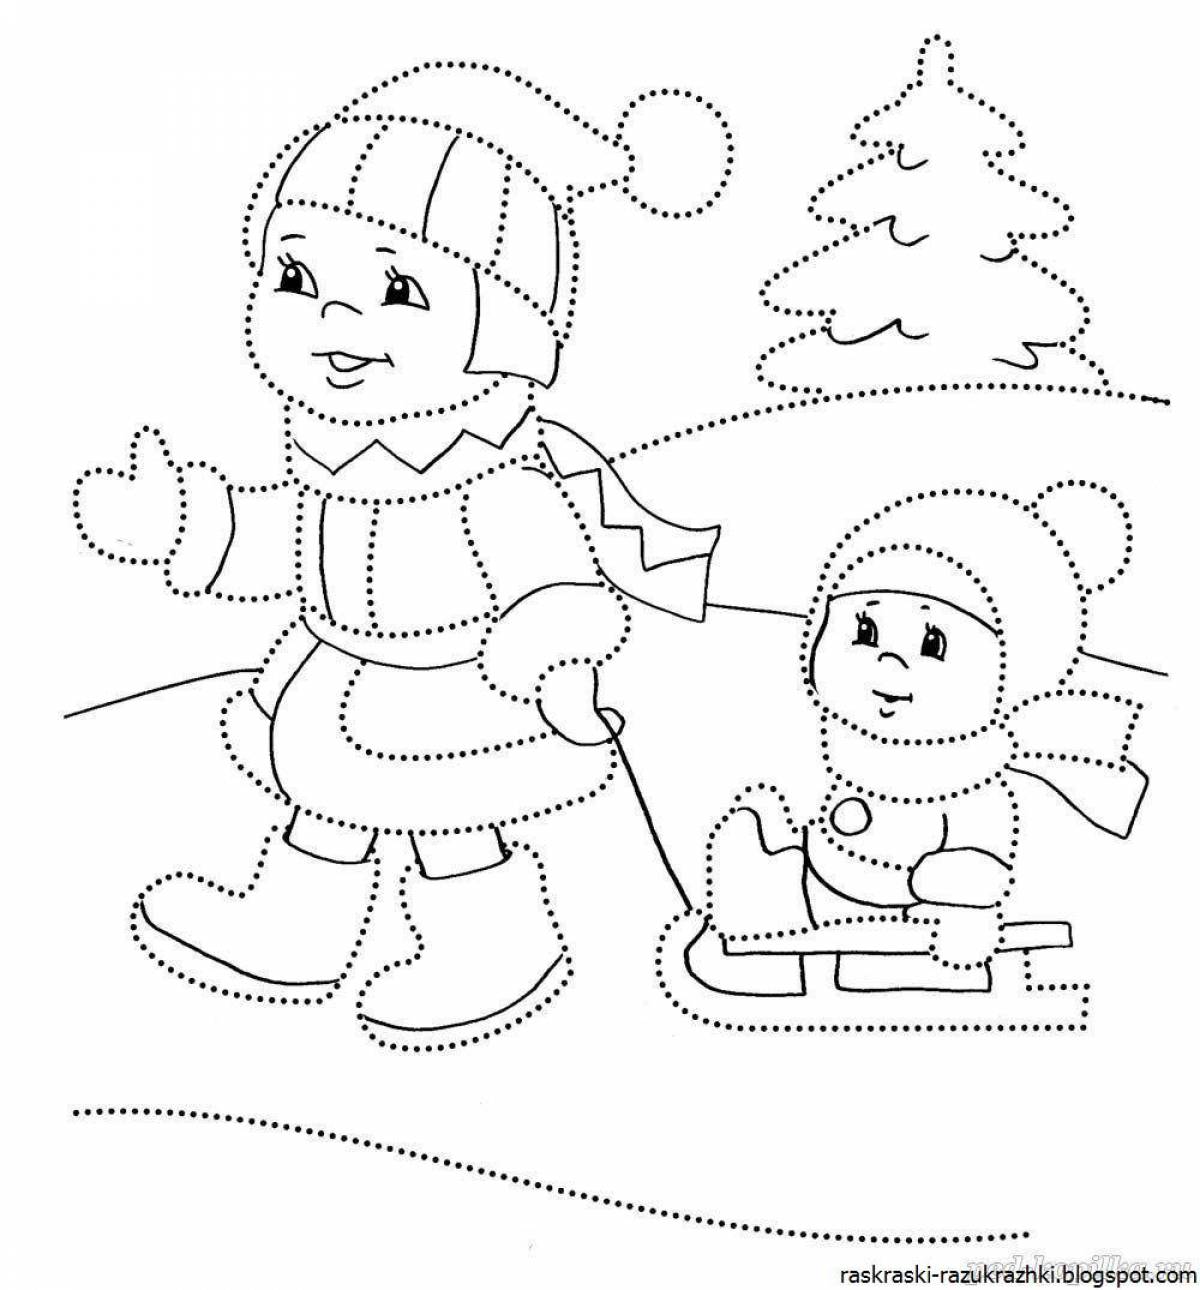 Luminous coloring book for children winter fun 5-6 years old